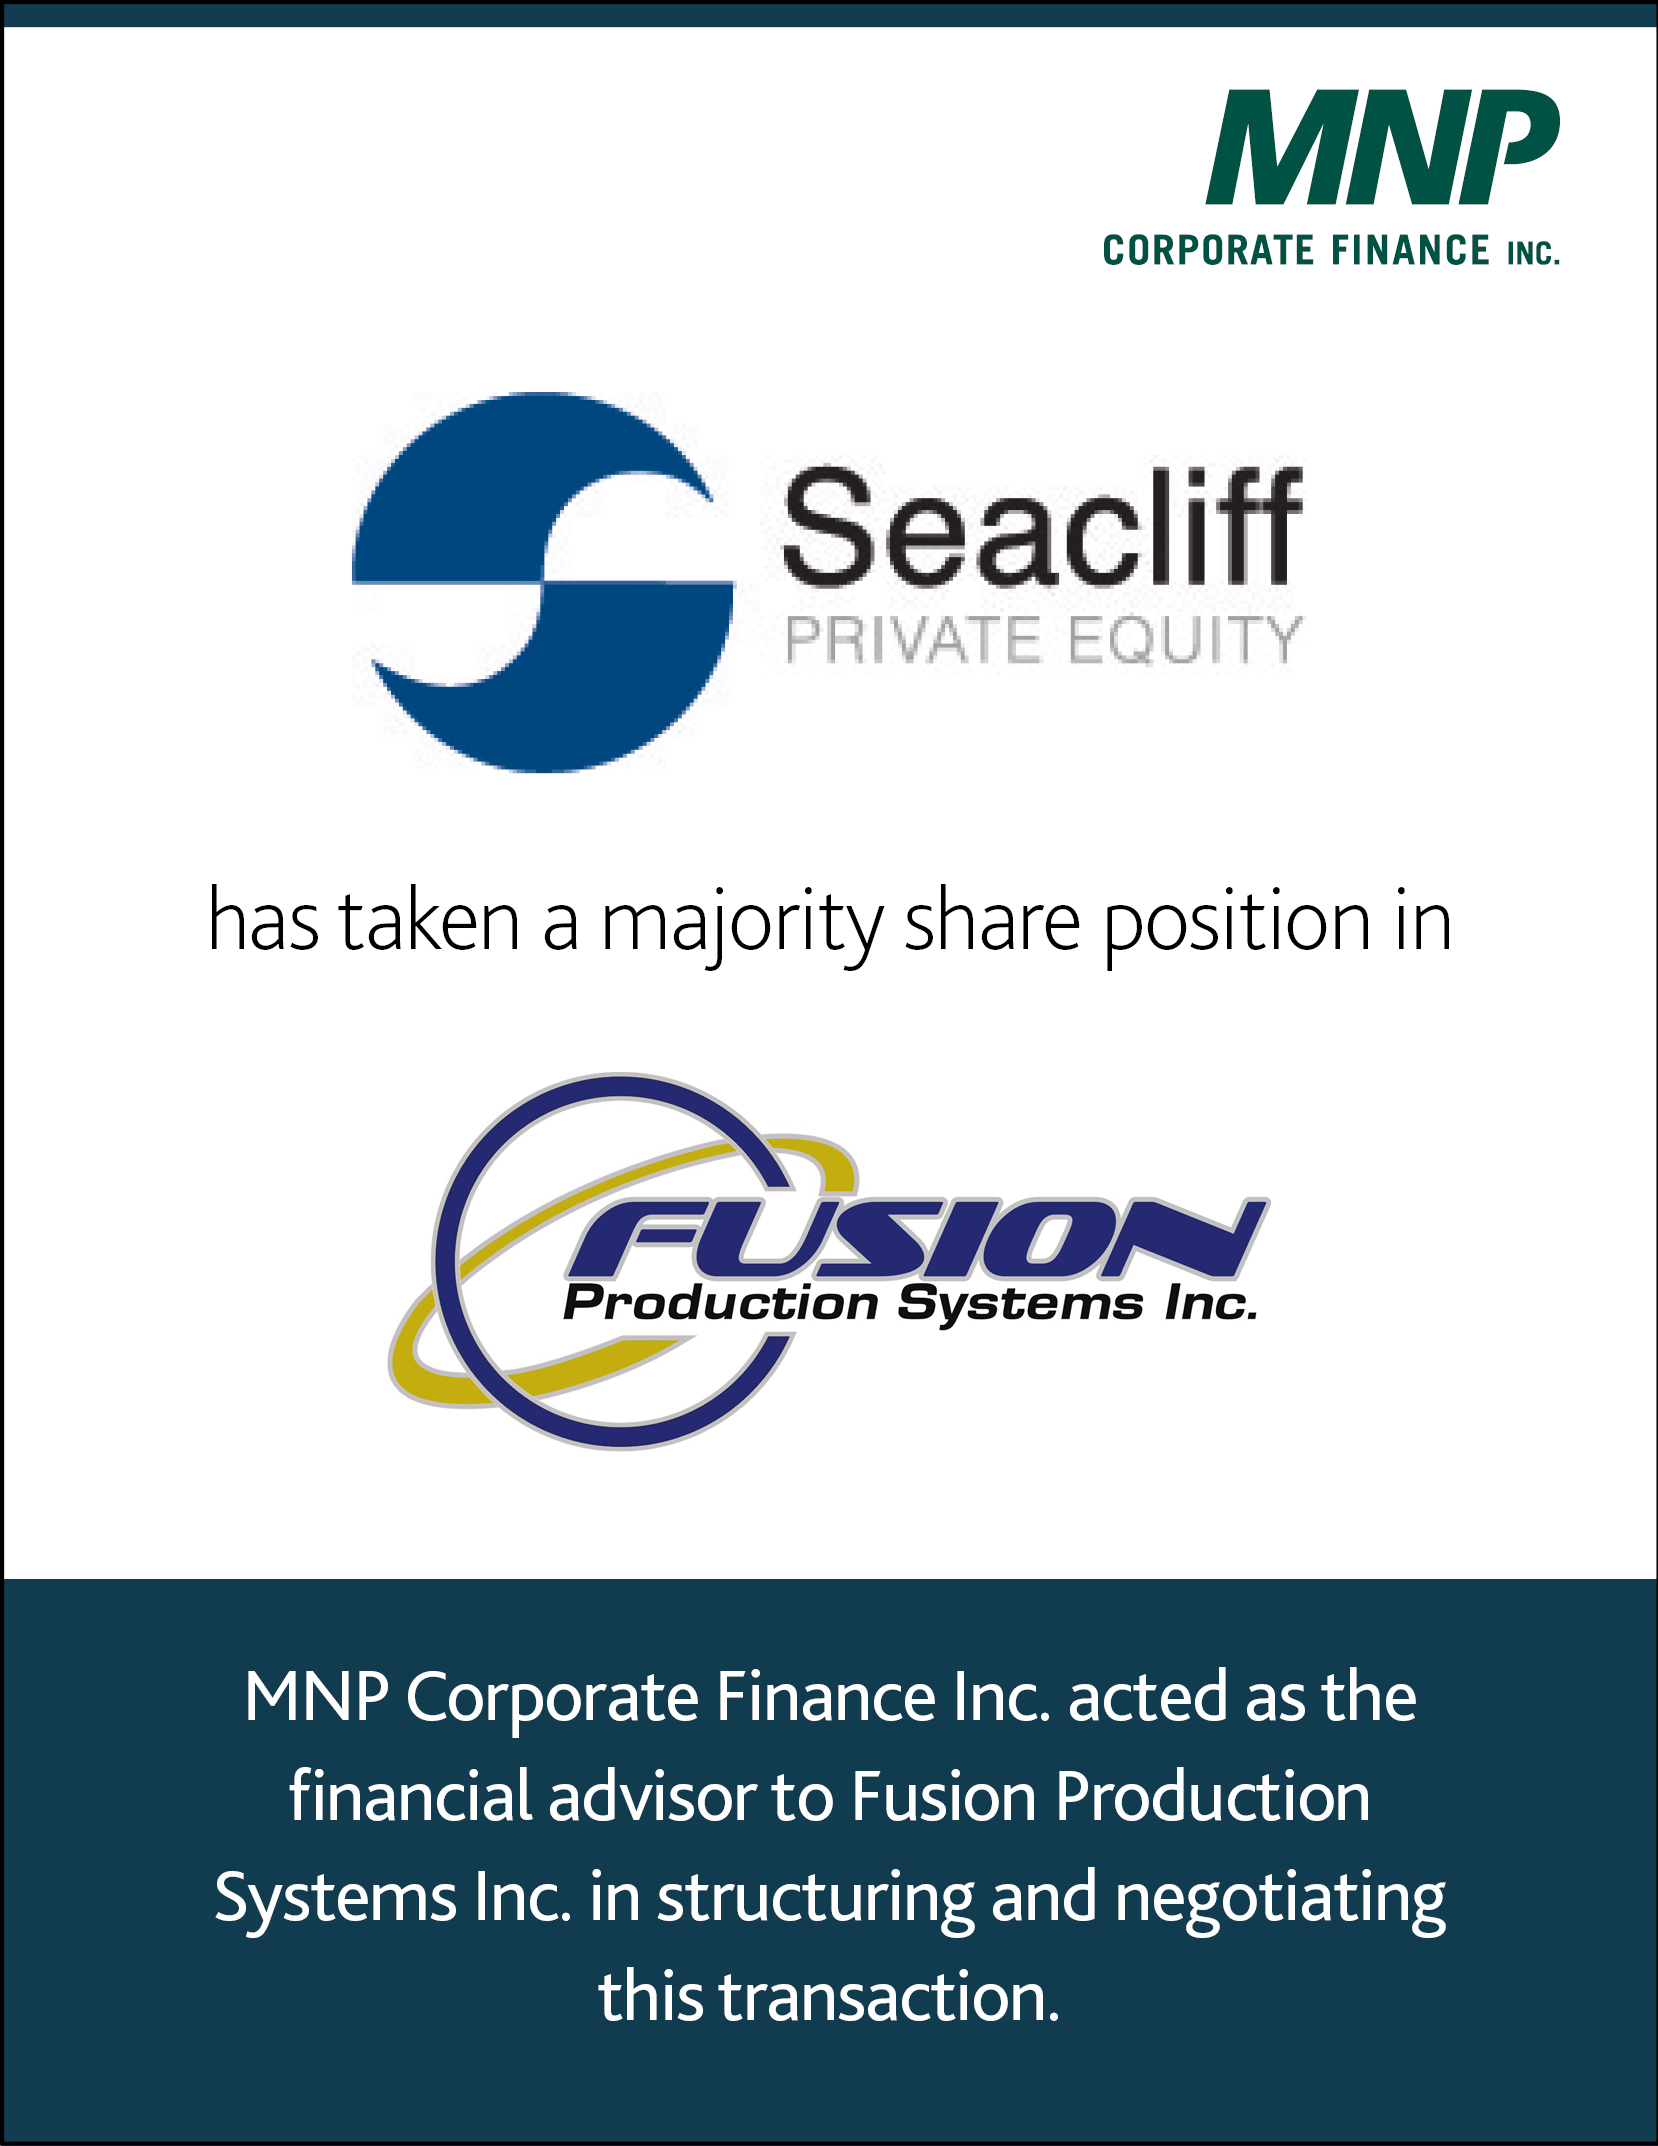 Seacliff Private Equity has taken majority share position in Fusion Production Systems Inc.